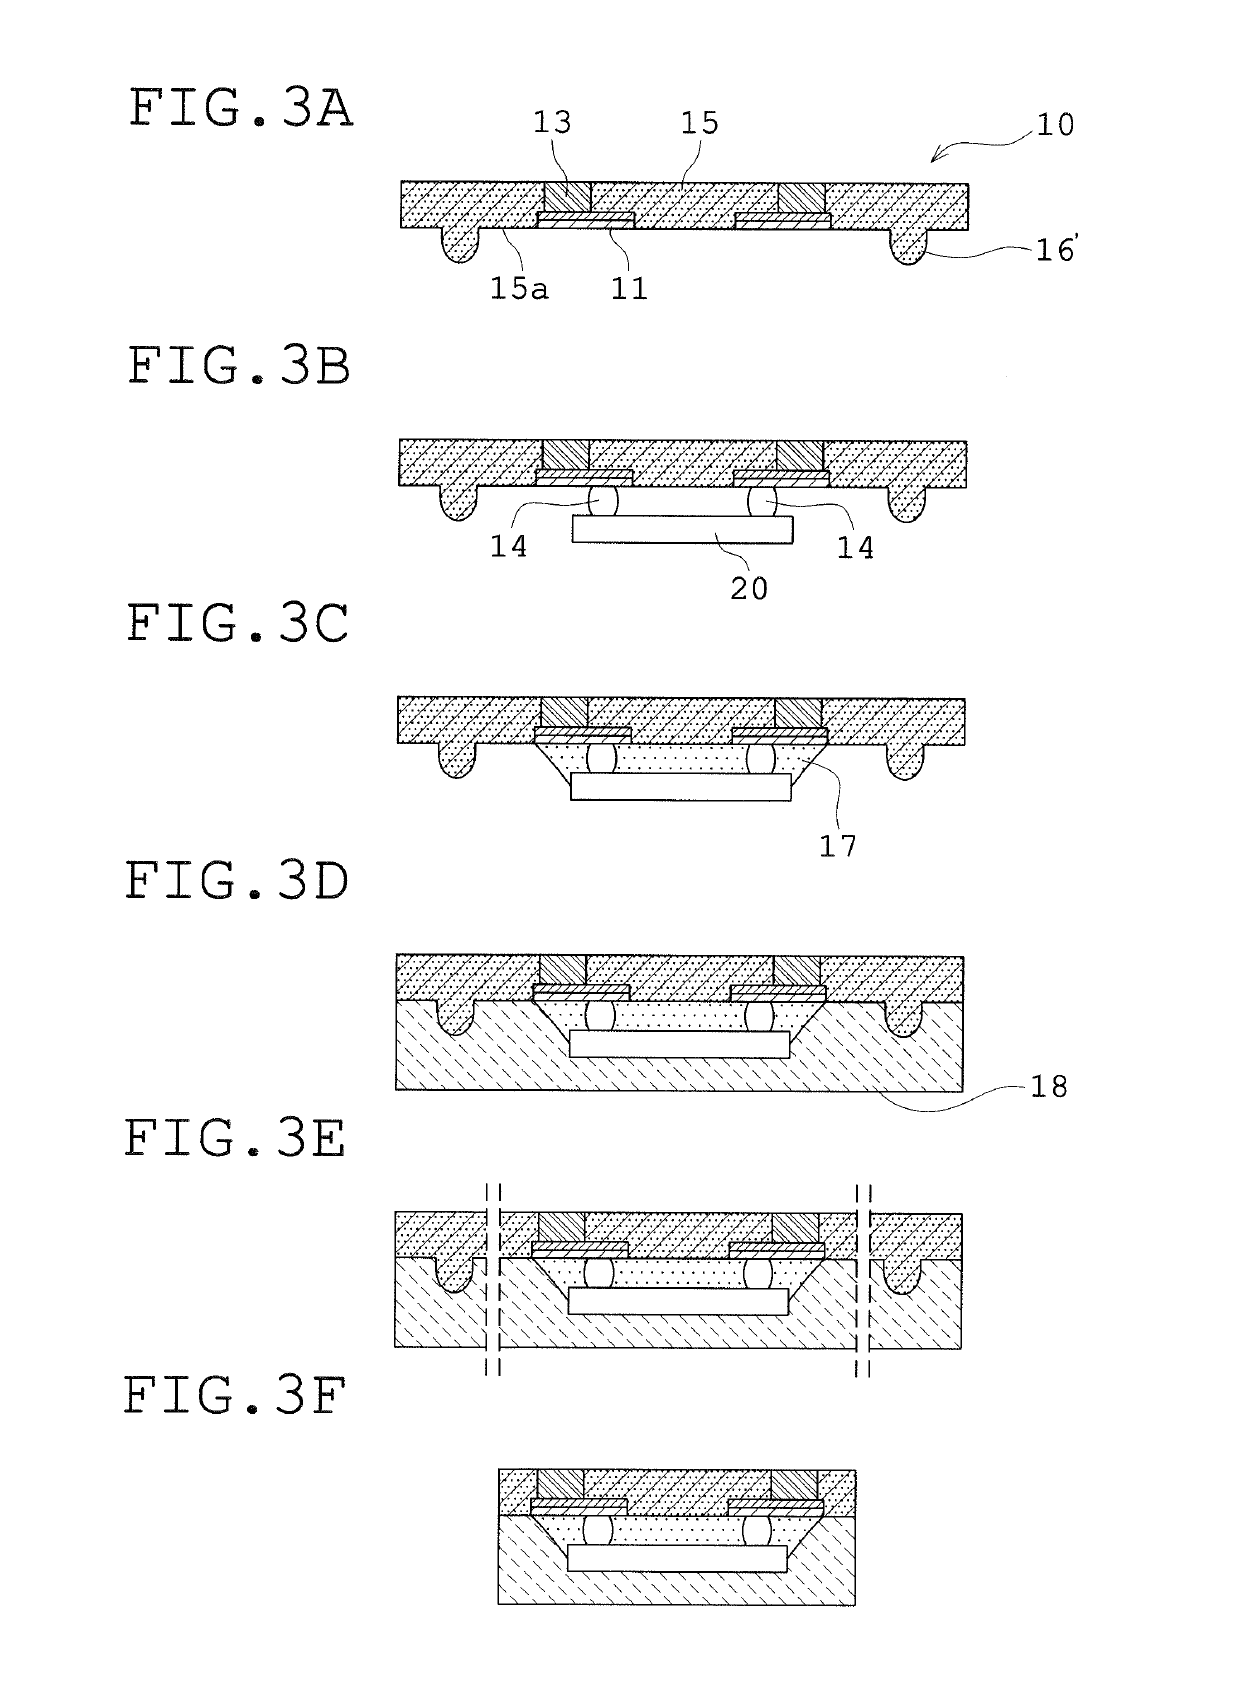 Multi-row wiring member for semiconductor device and method for manufacturing the same